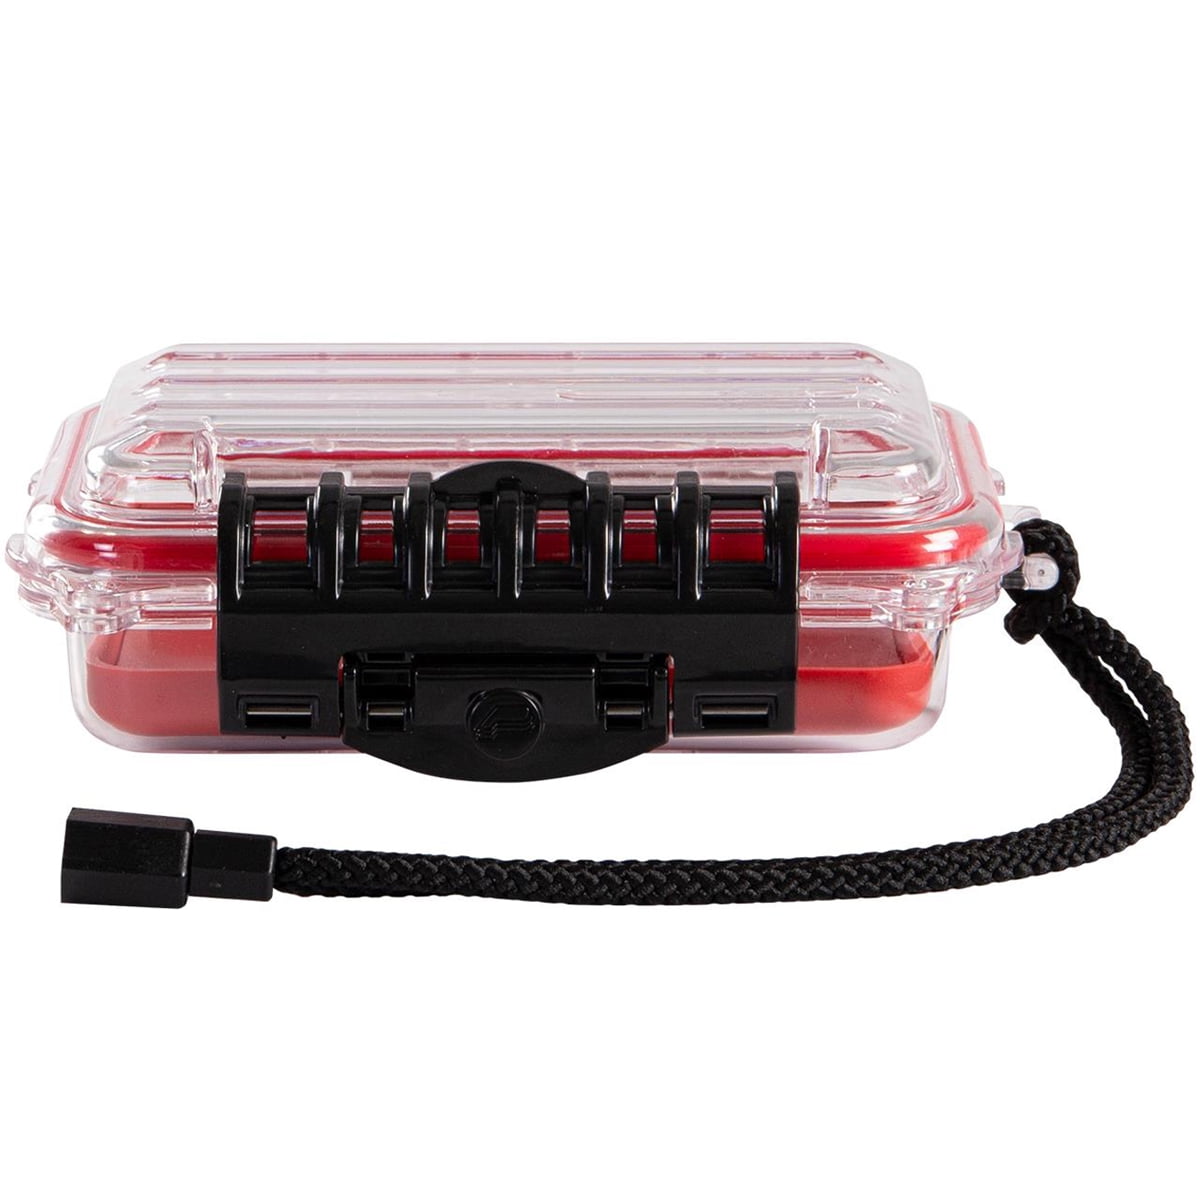 Plano Guide Series Waterproof Storage Case, Red/Clear 